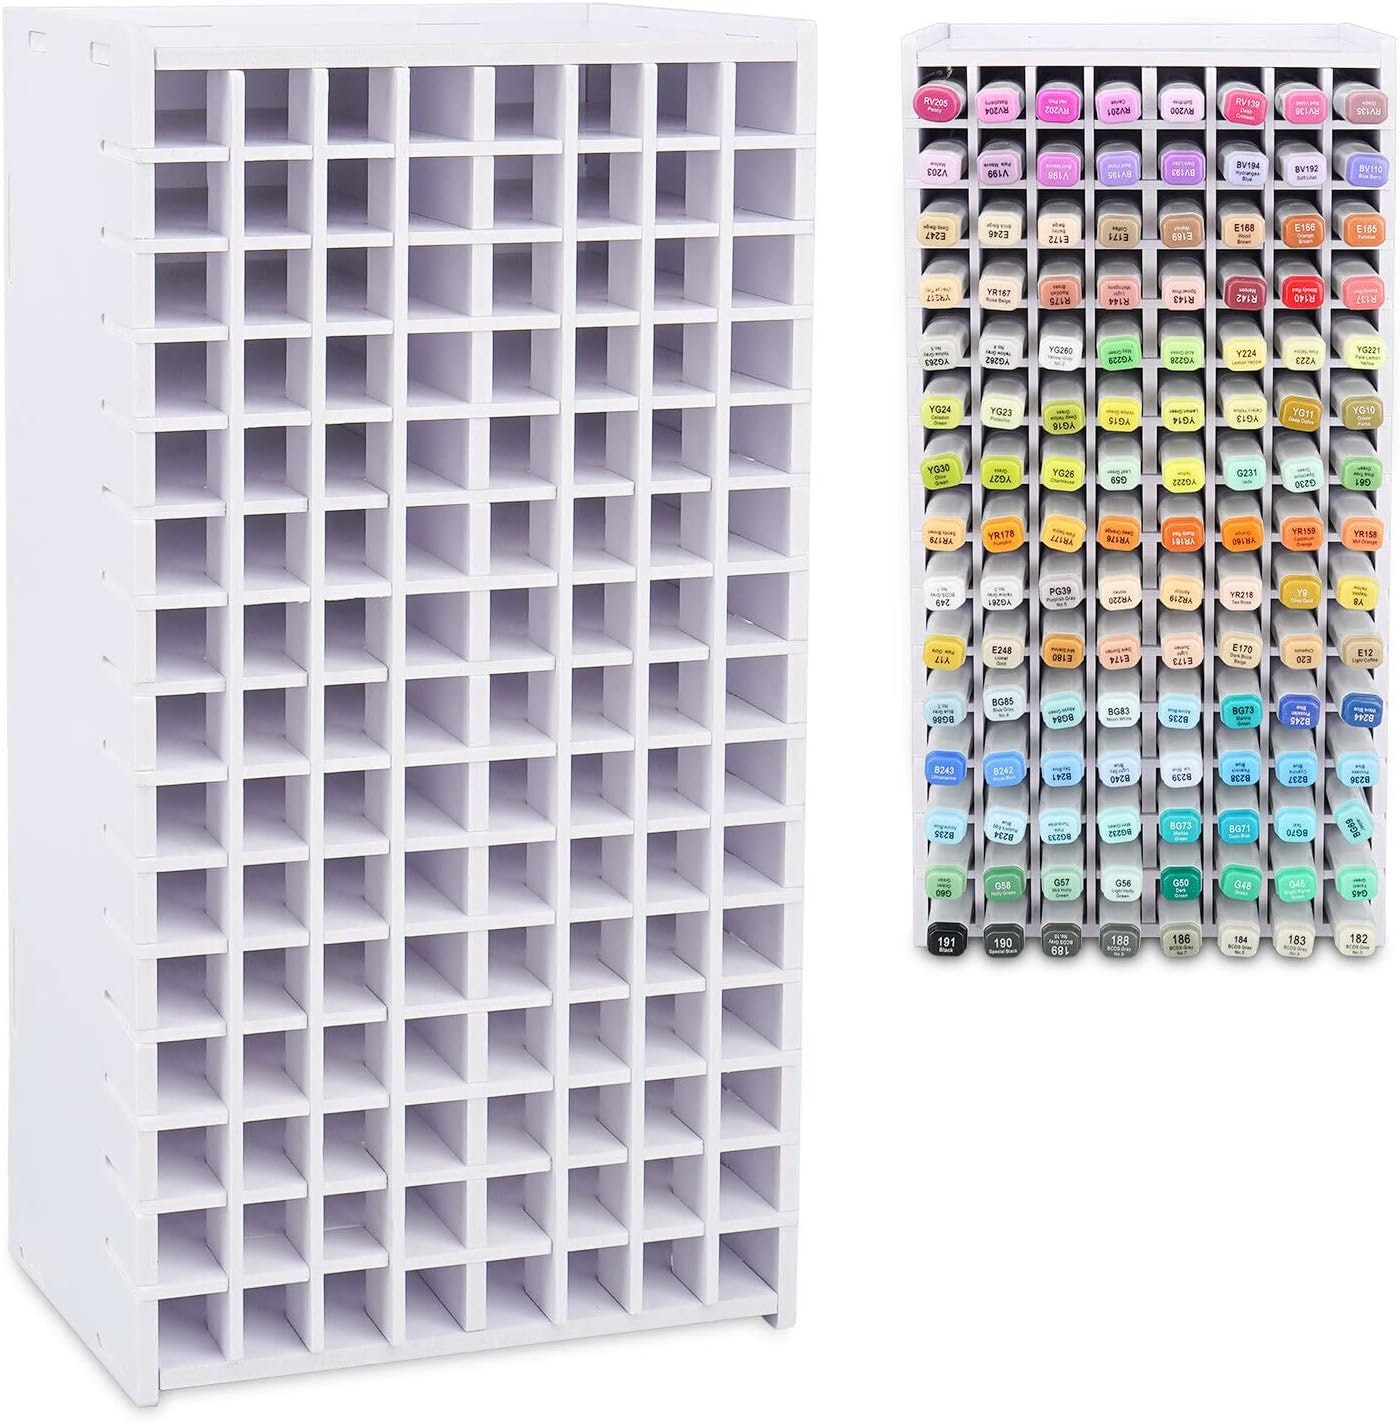 Copic Marker Storage TYPE 3 Organizer for Copic Art Carrying Case insert  Only 